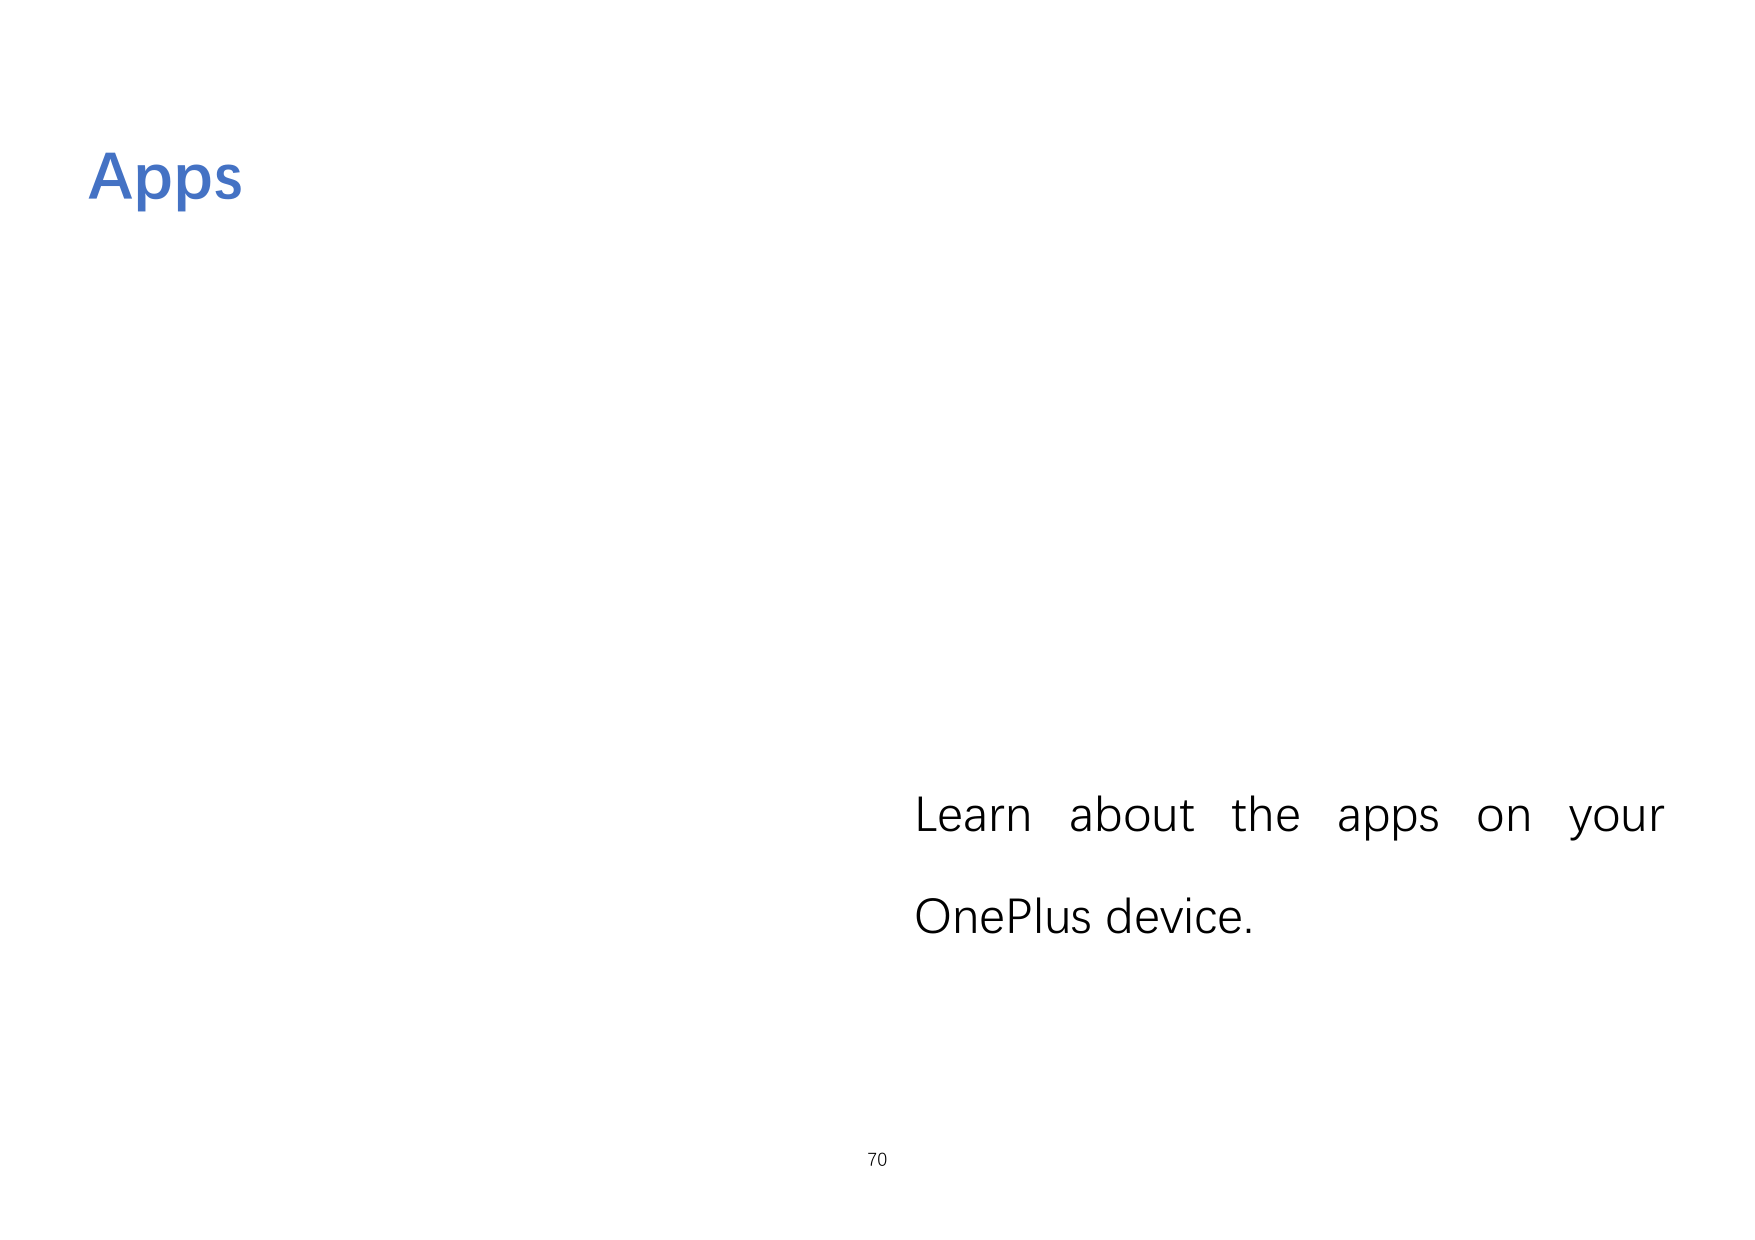 AppsLearn about the apps on yourOnePlus device.70